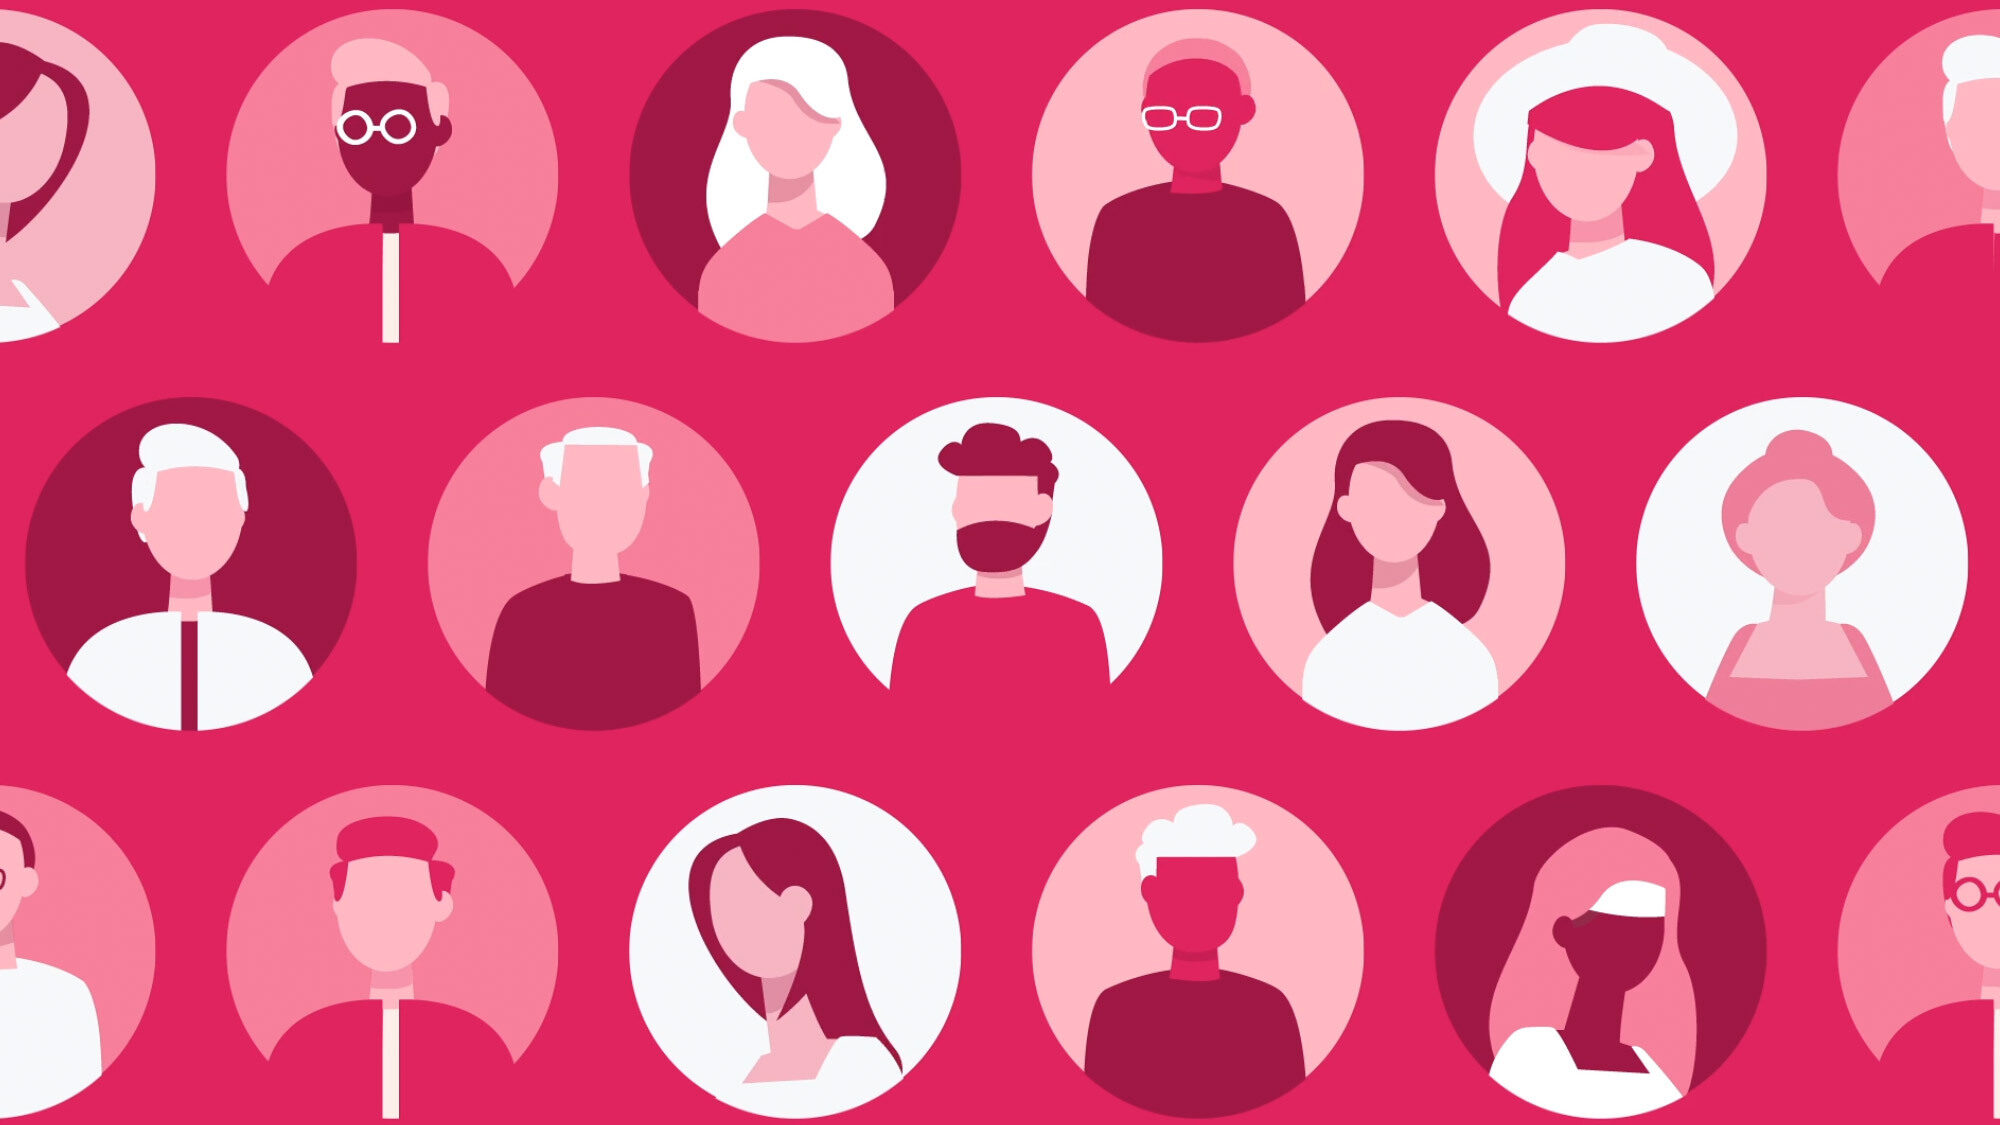 Profile graphics of audience personas from Twitter's content